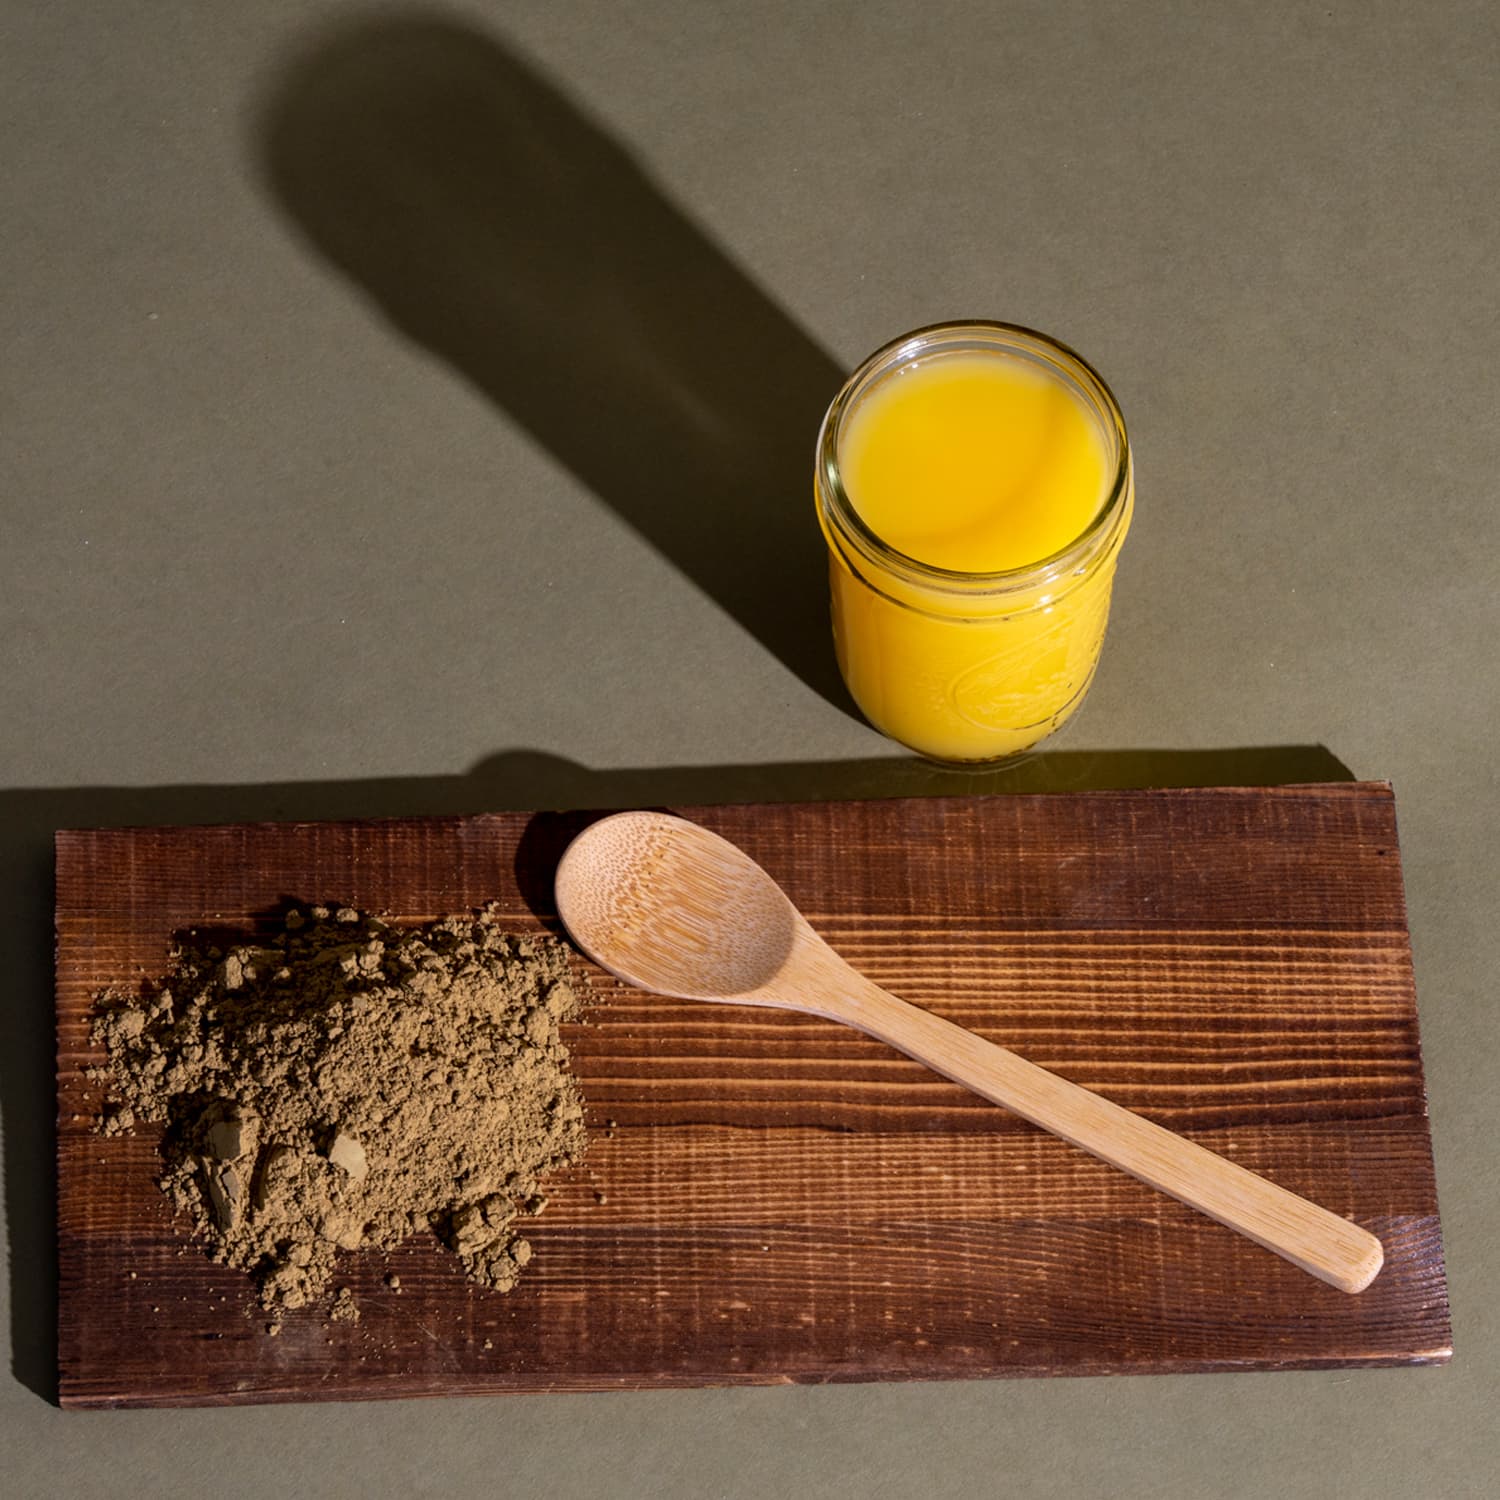 A wooden cutting board with a spoon and brown powder next to a glass of orange juice